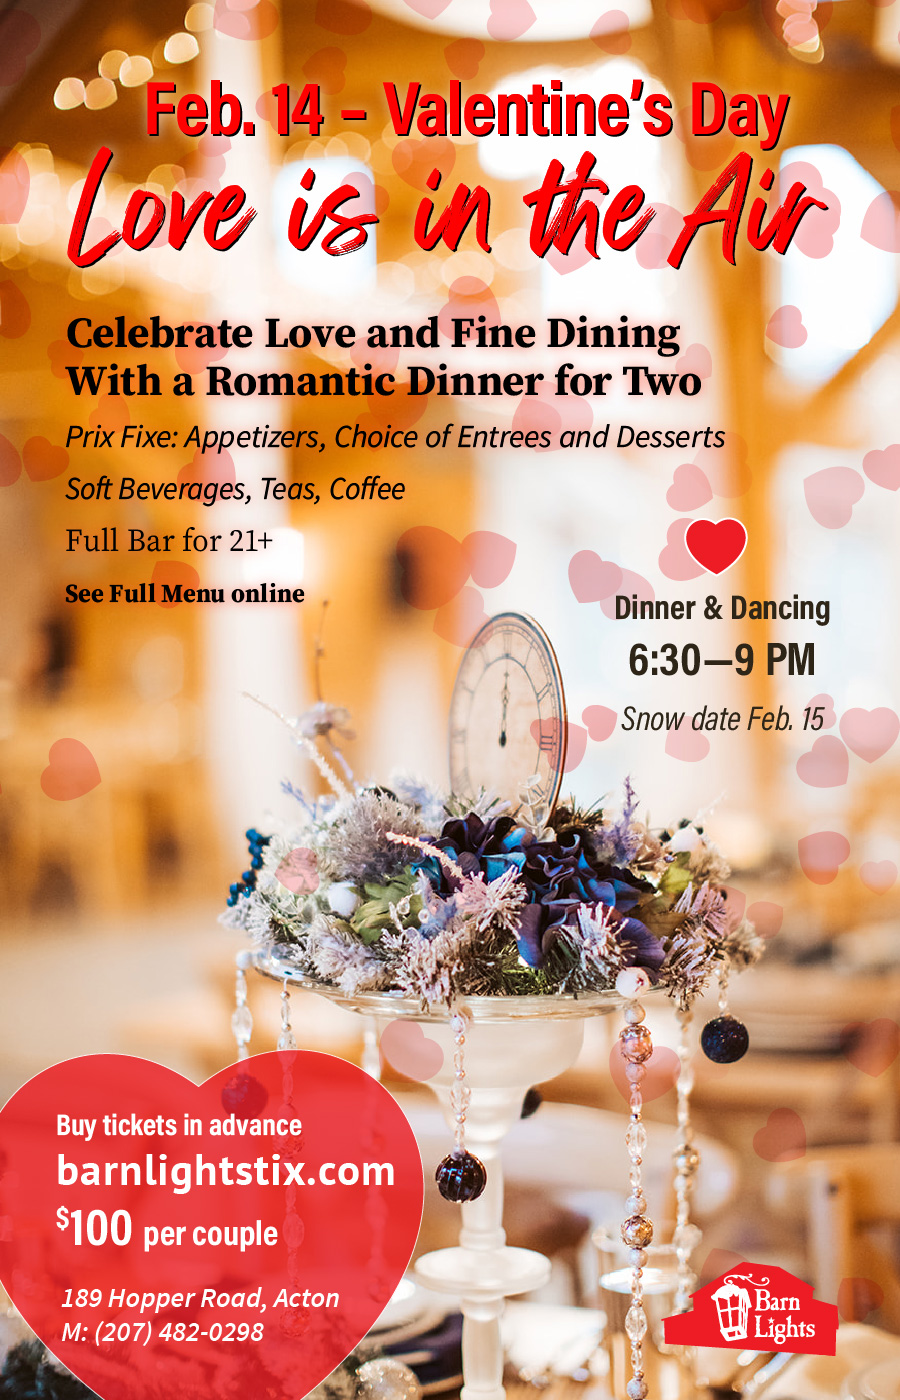 Enjoy a cozy, intimate dining experience, with dancing after dinner.  Buy tickets in advance and choose your entree type (including a vegetarian option).  


$50 per person. 